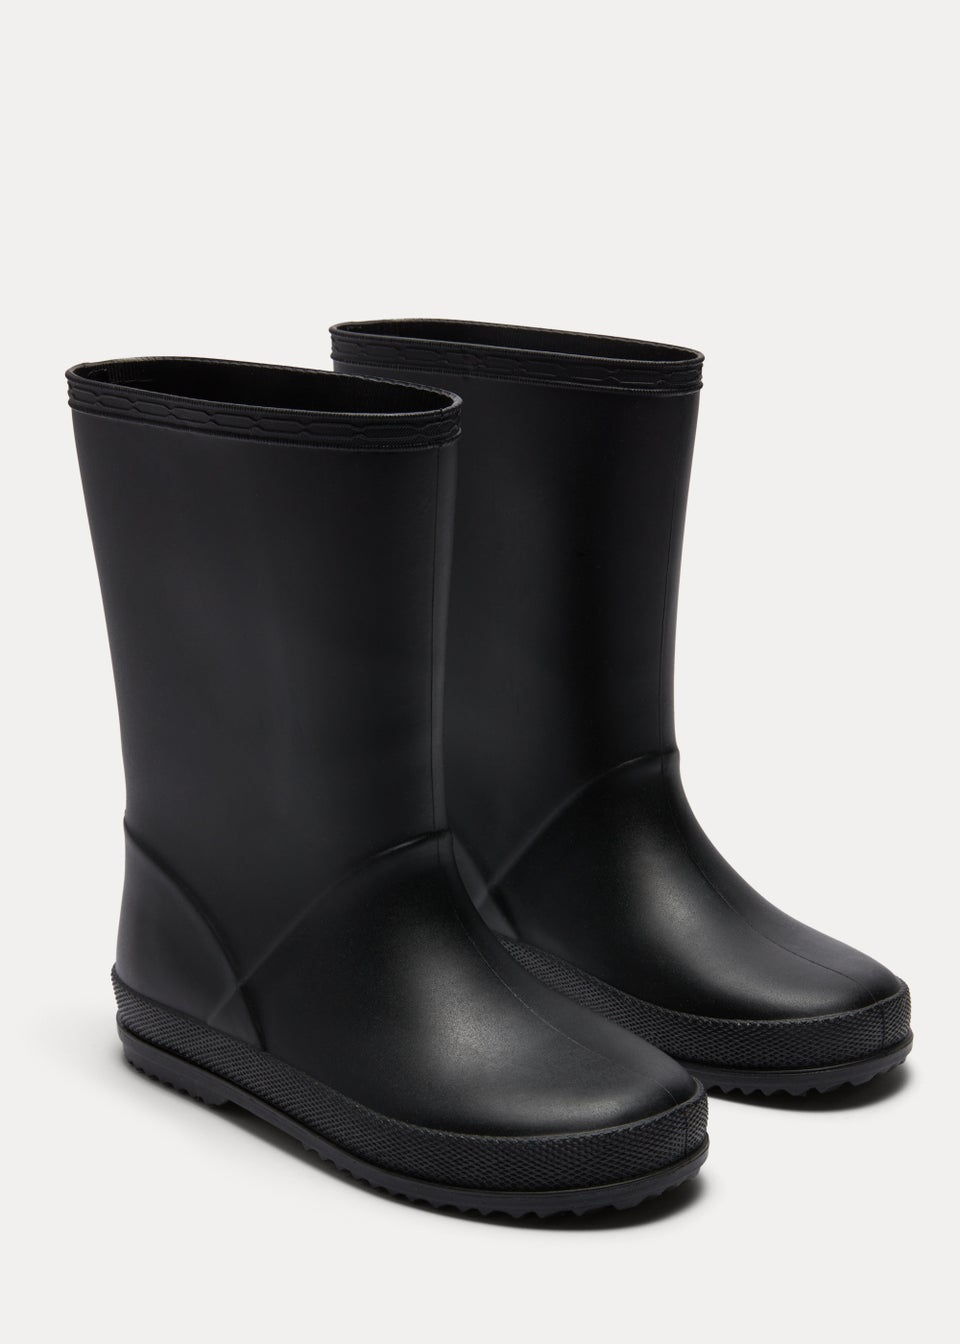 Boys Black PVC Wellies (Younger 10-Older 6)